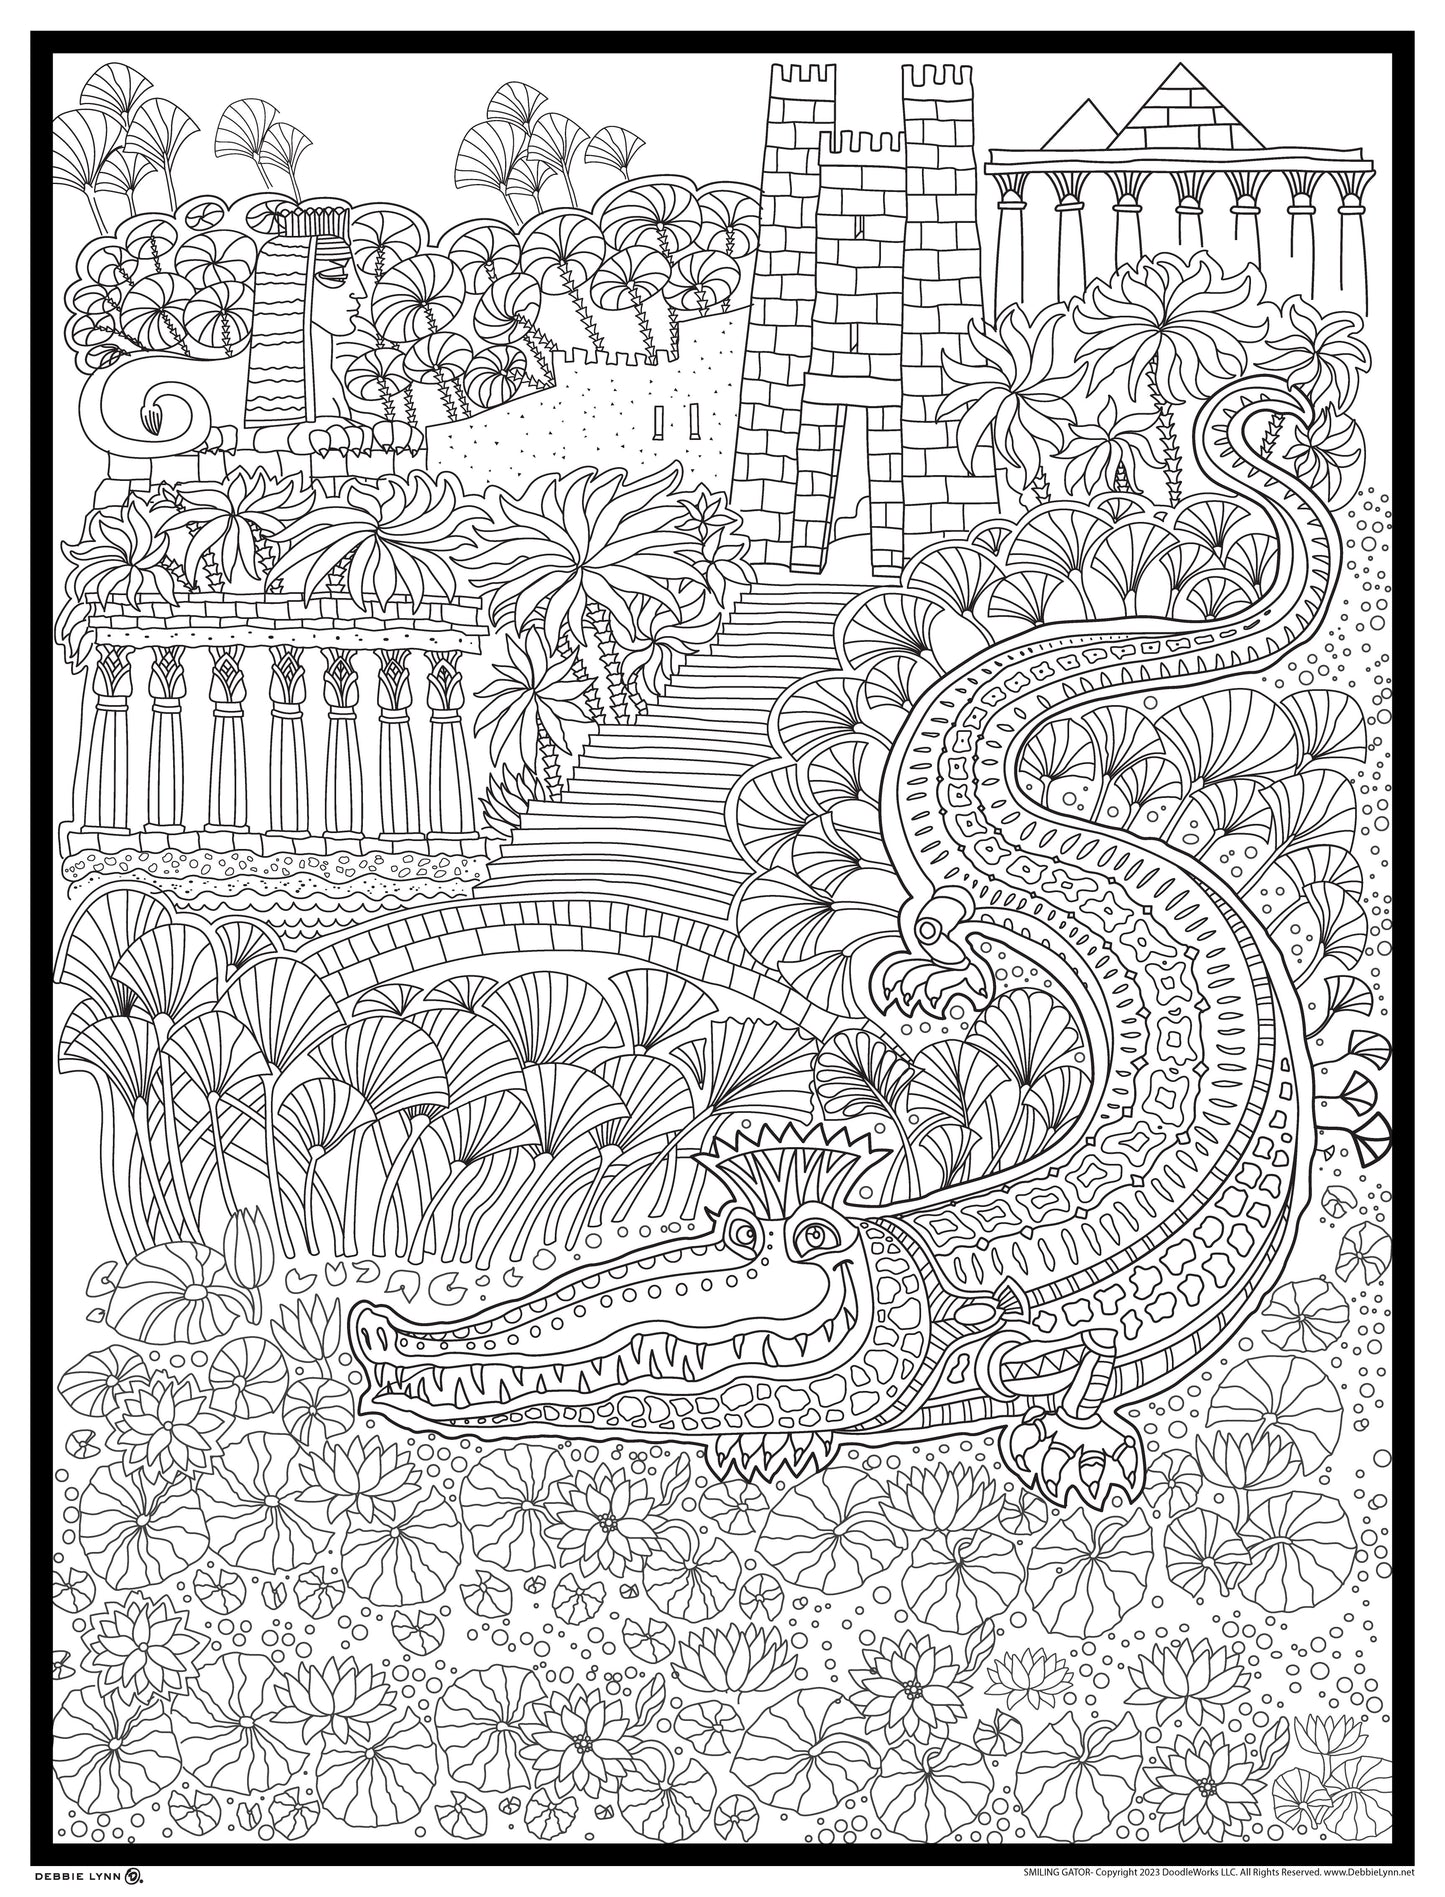 Smiling Gator Personalized Giant Coloring Poster 46"x60"